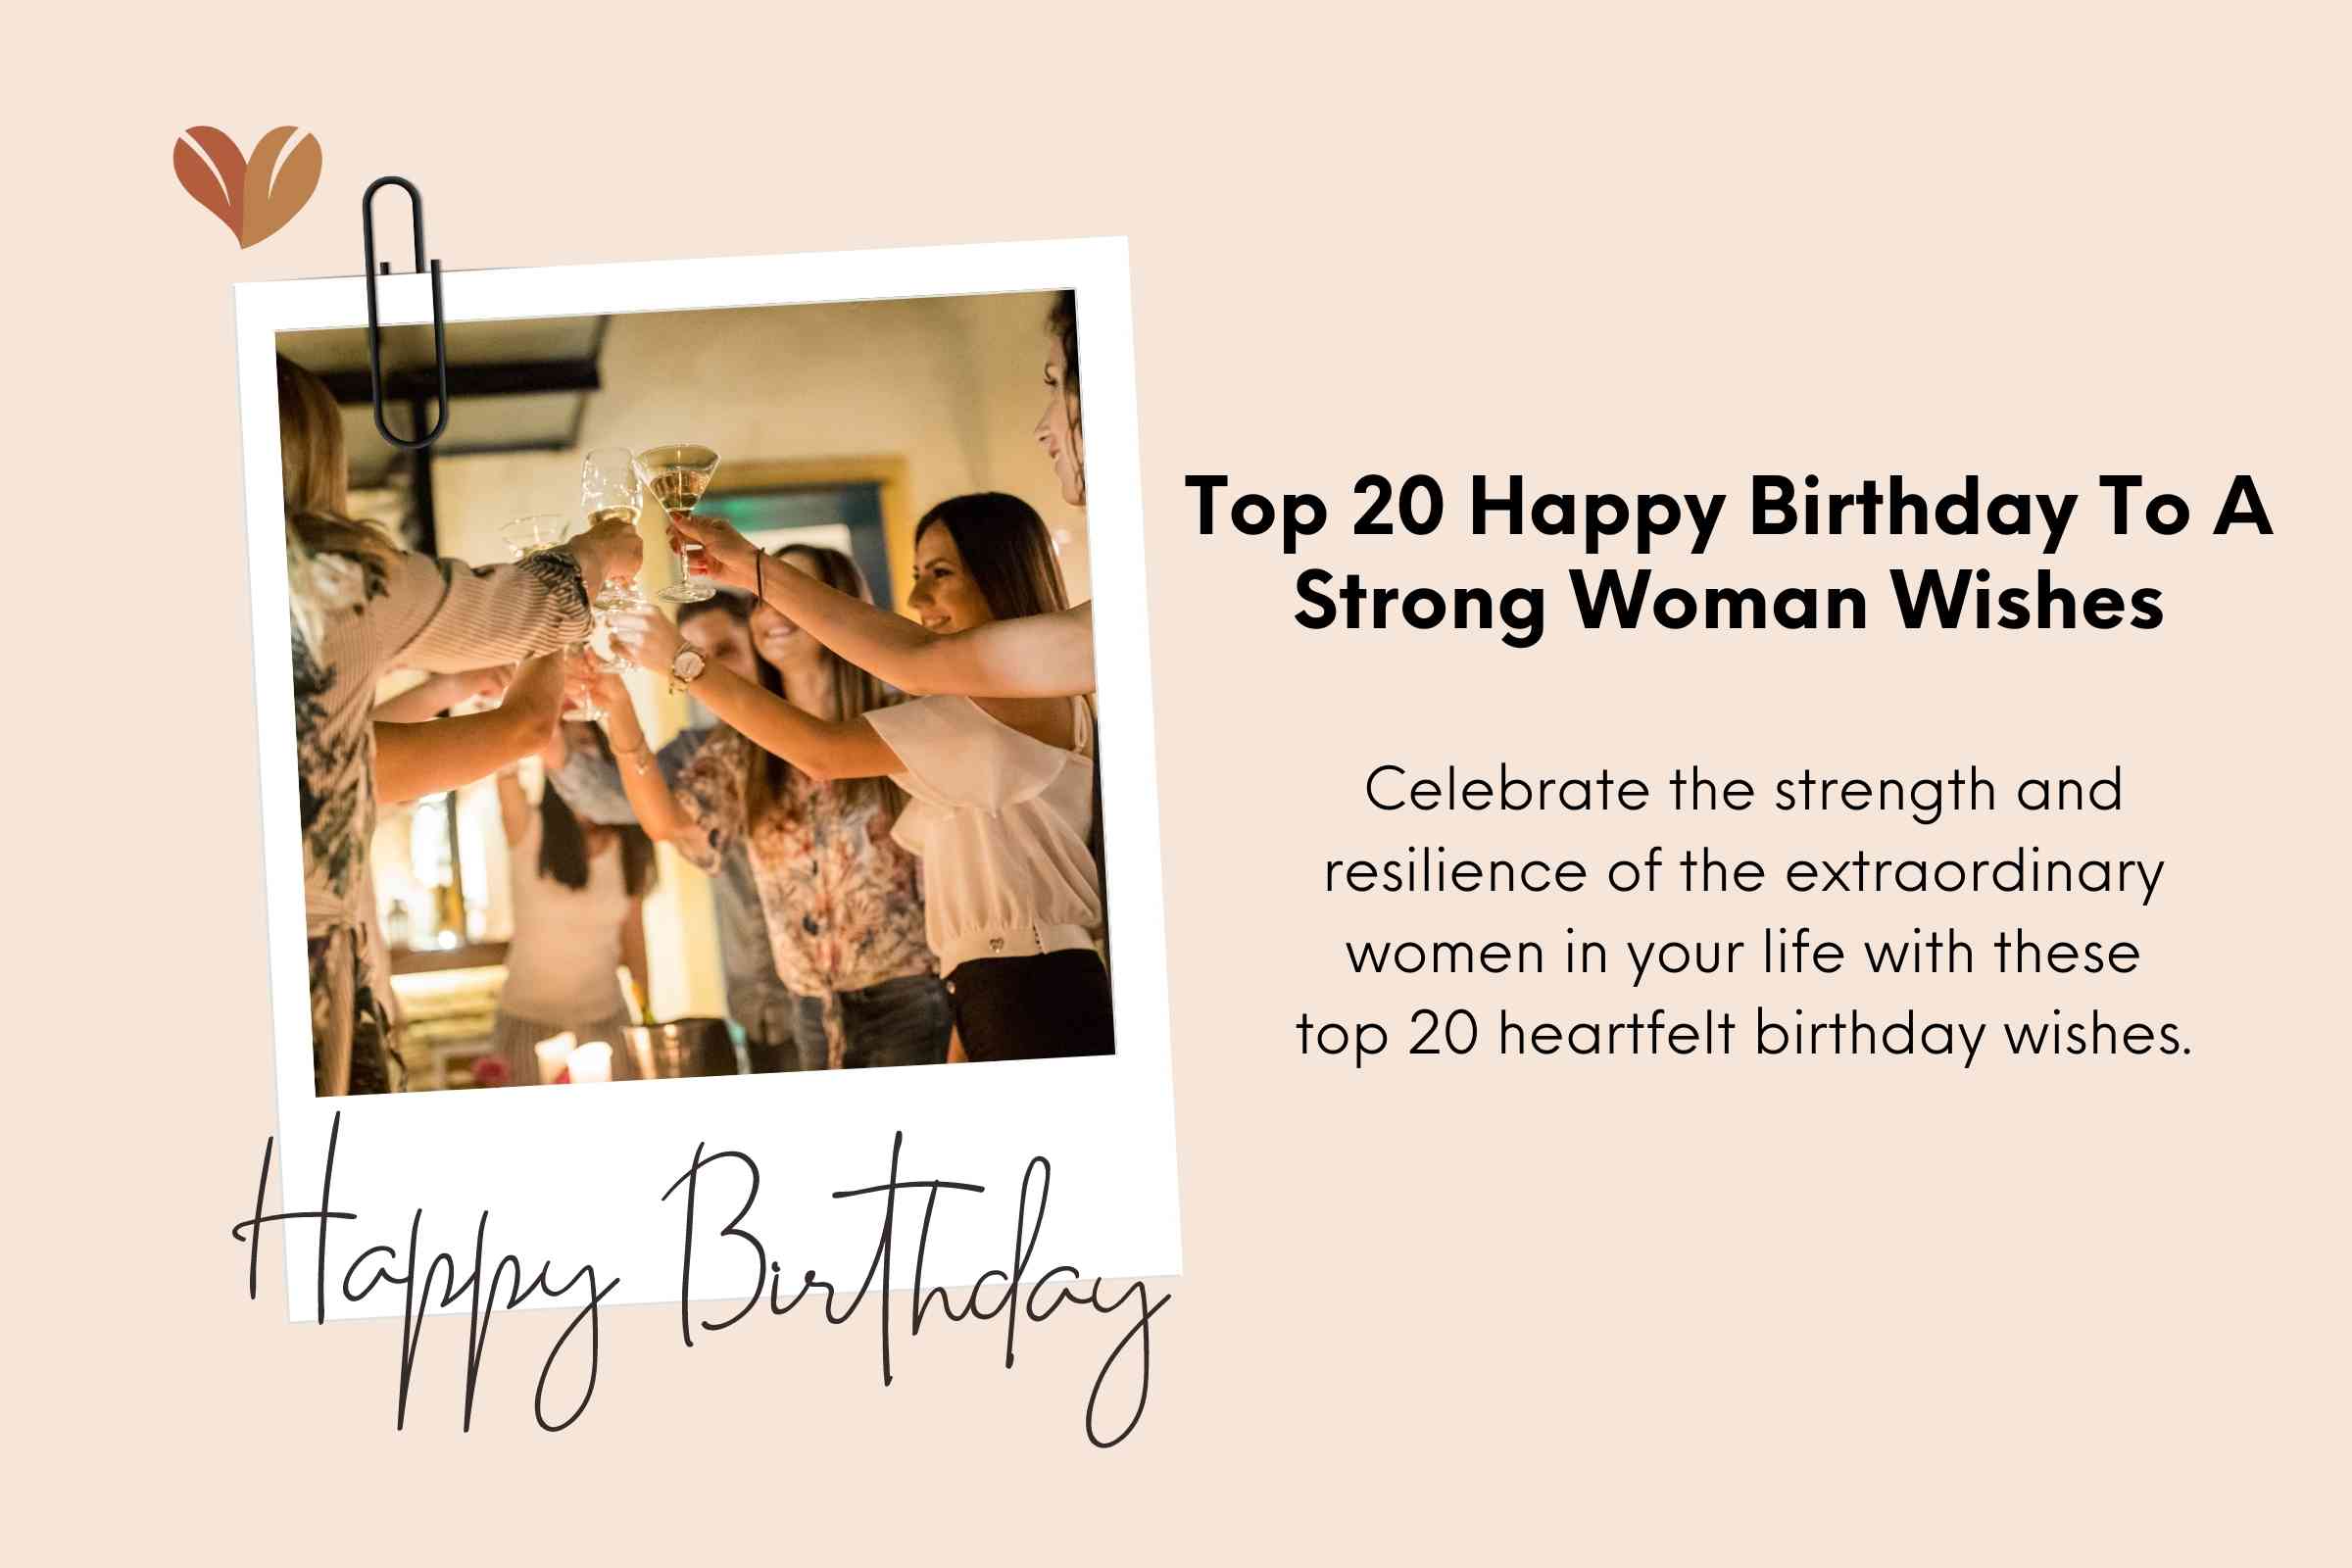 Top 20 Happy Birthday To A Strong Woman Wishes